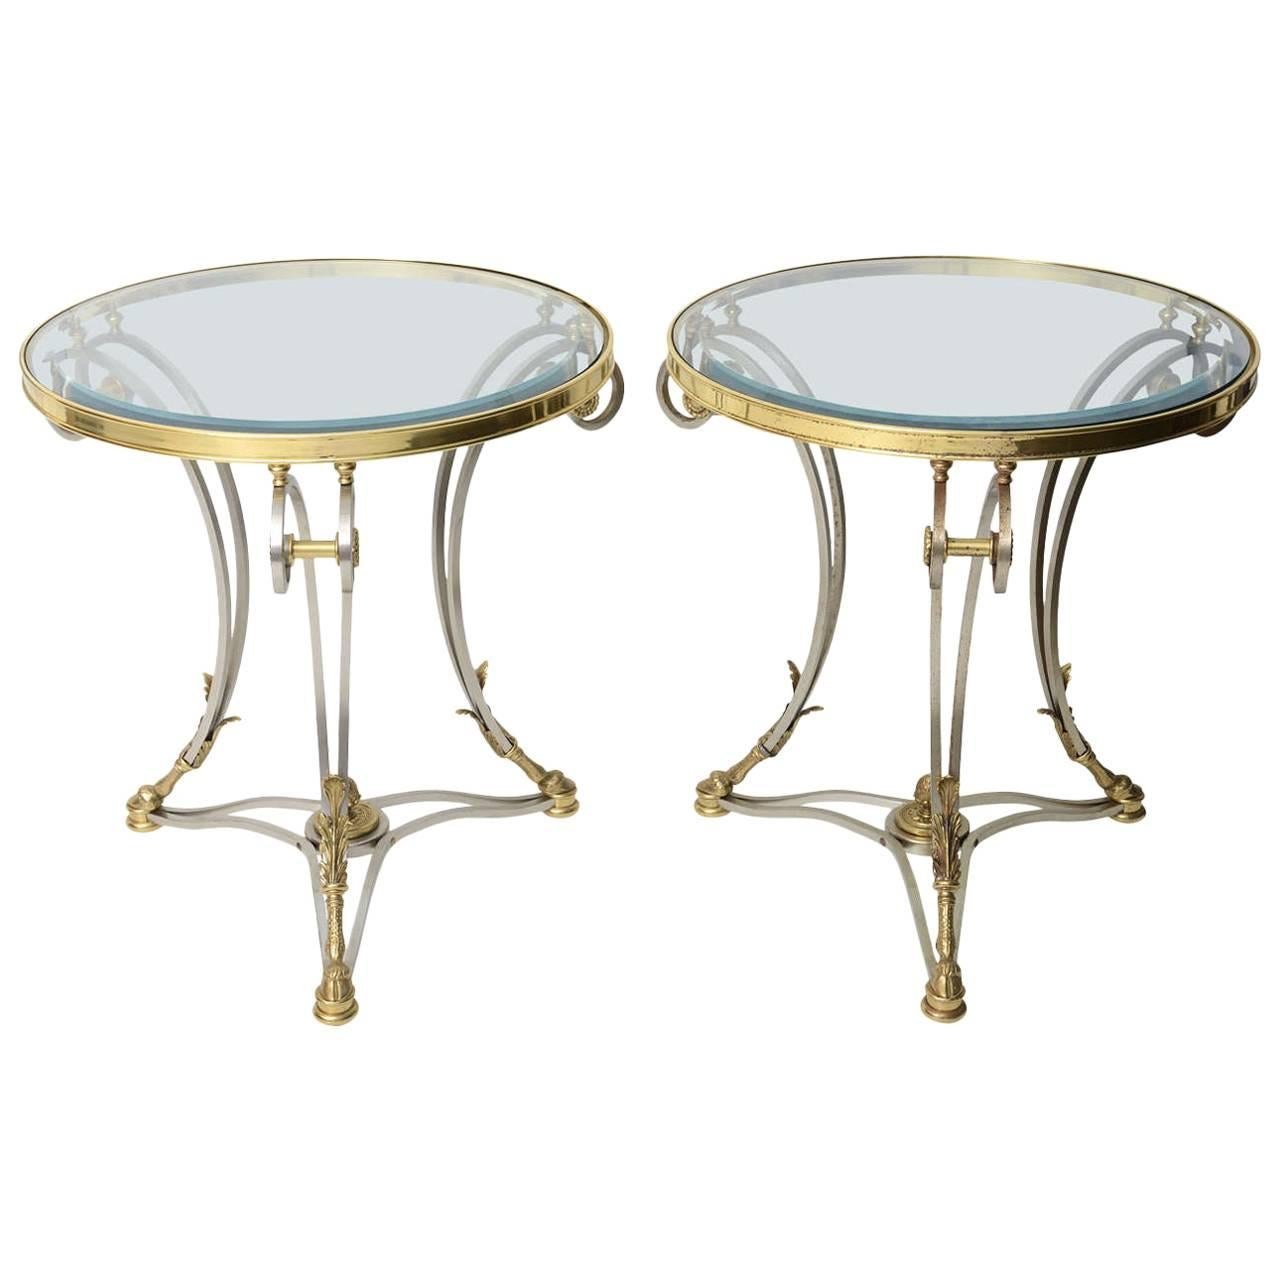 Pair of Maison Jansen Style Neoclassical Tables